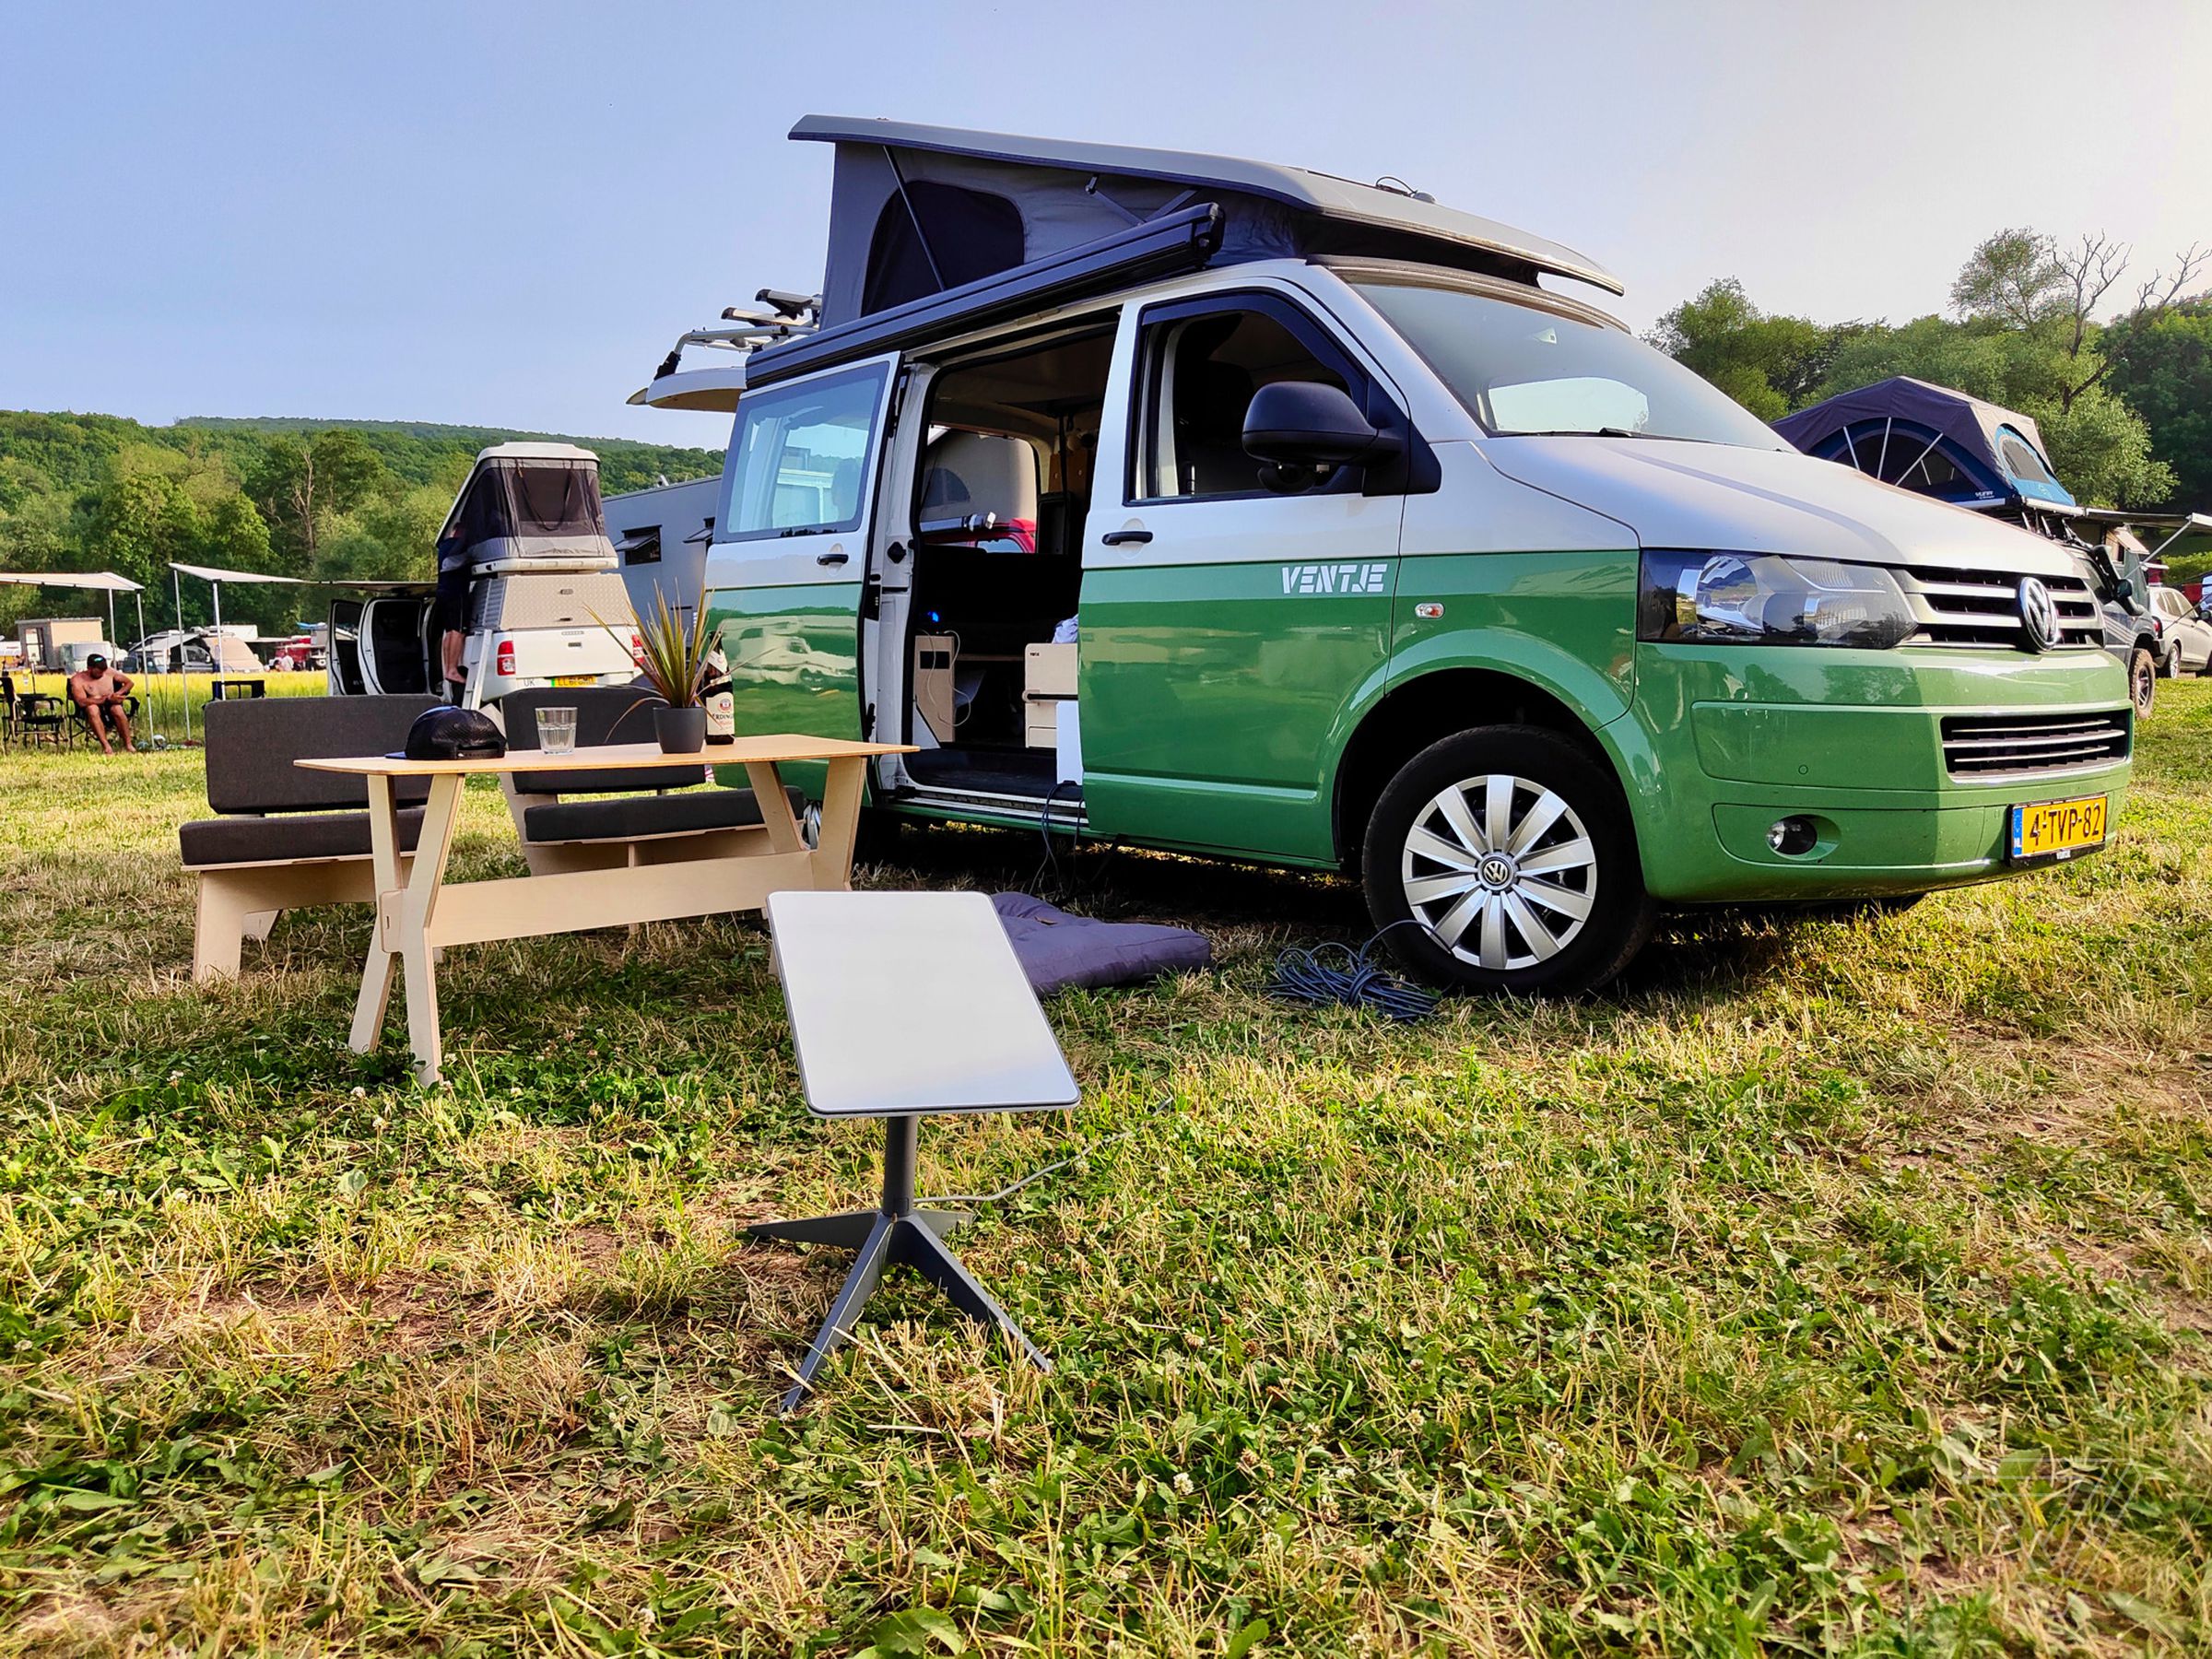 Technologies like Starlink RV made working from this festival in Germany easy.